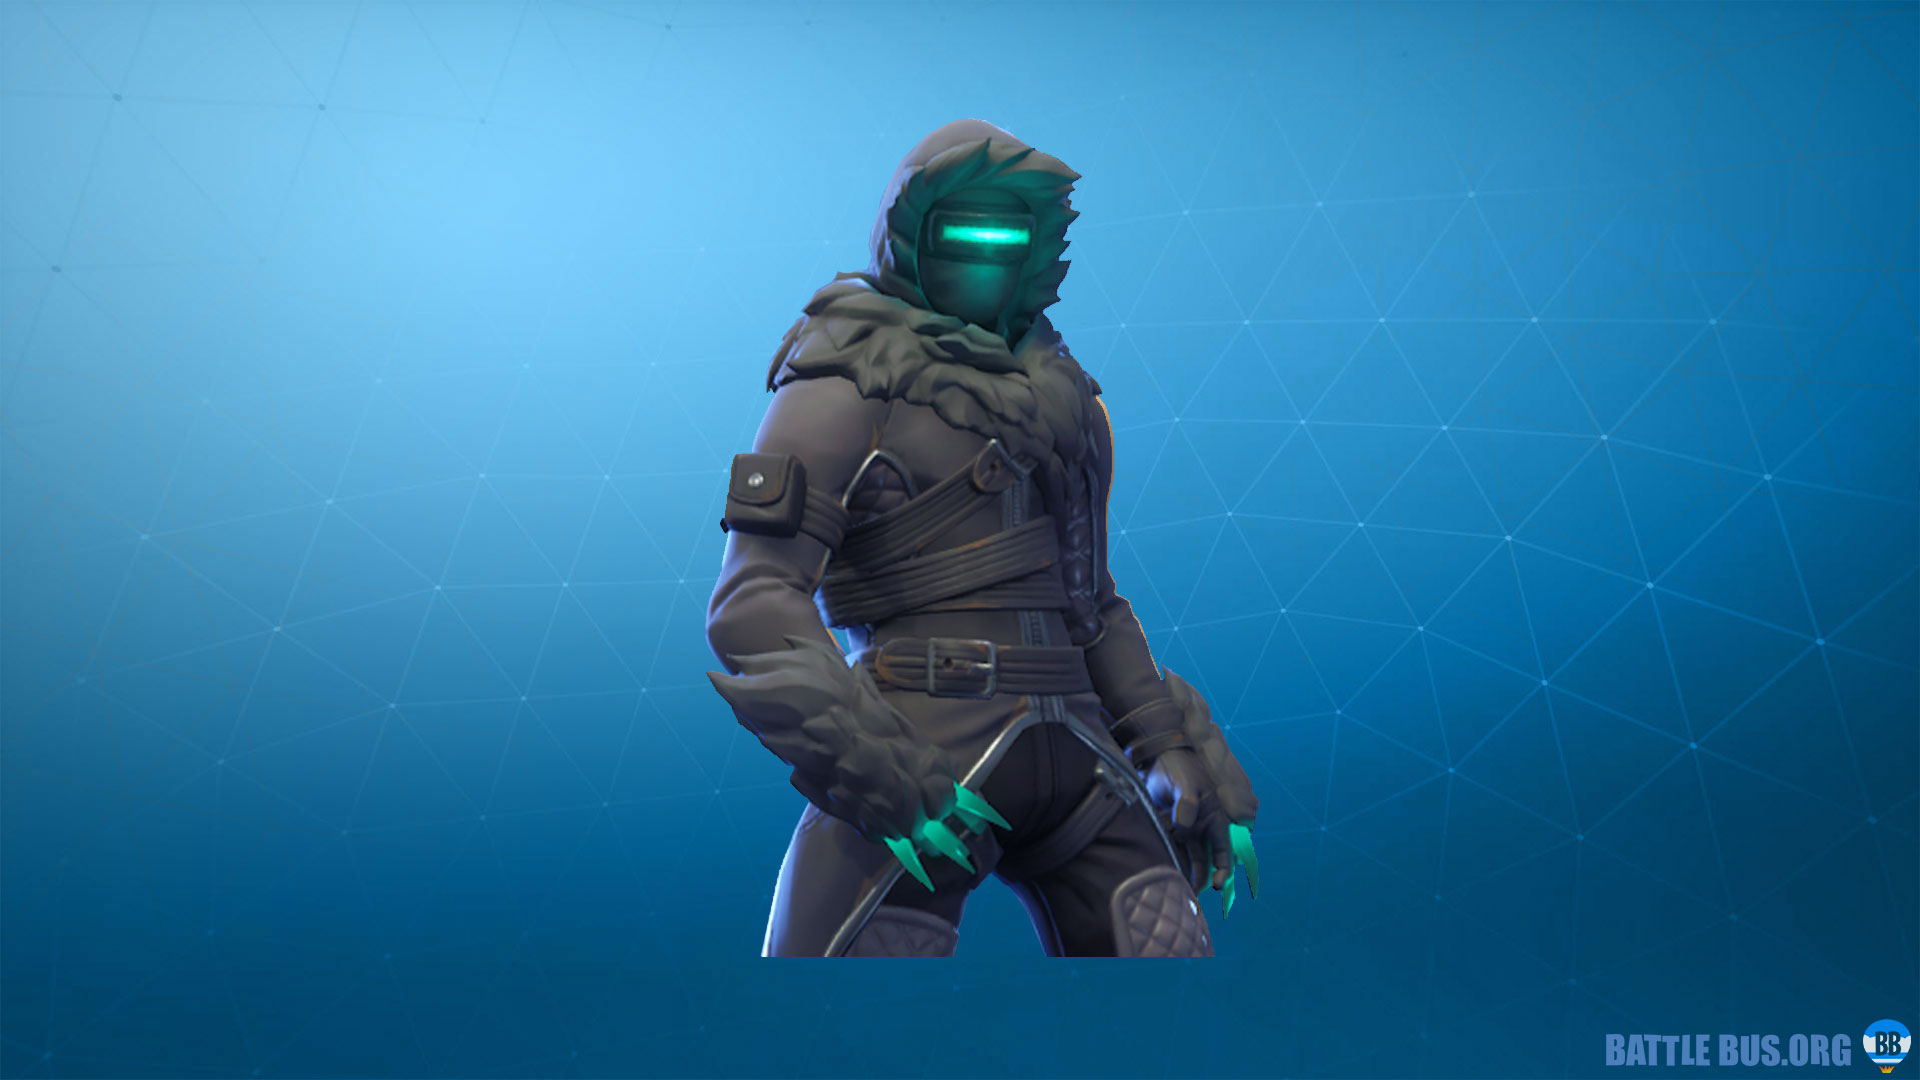 Zenith Fortnite Outfit Progressive Skin HD Image And Stats